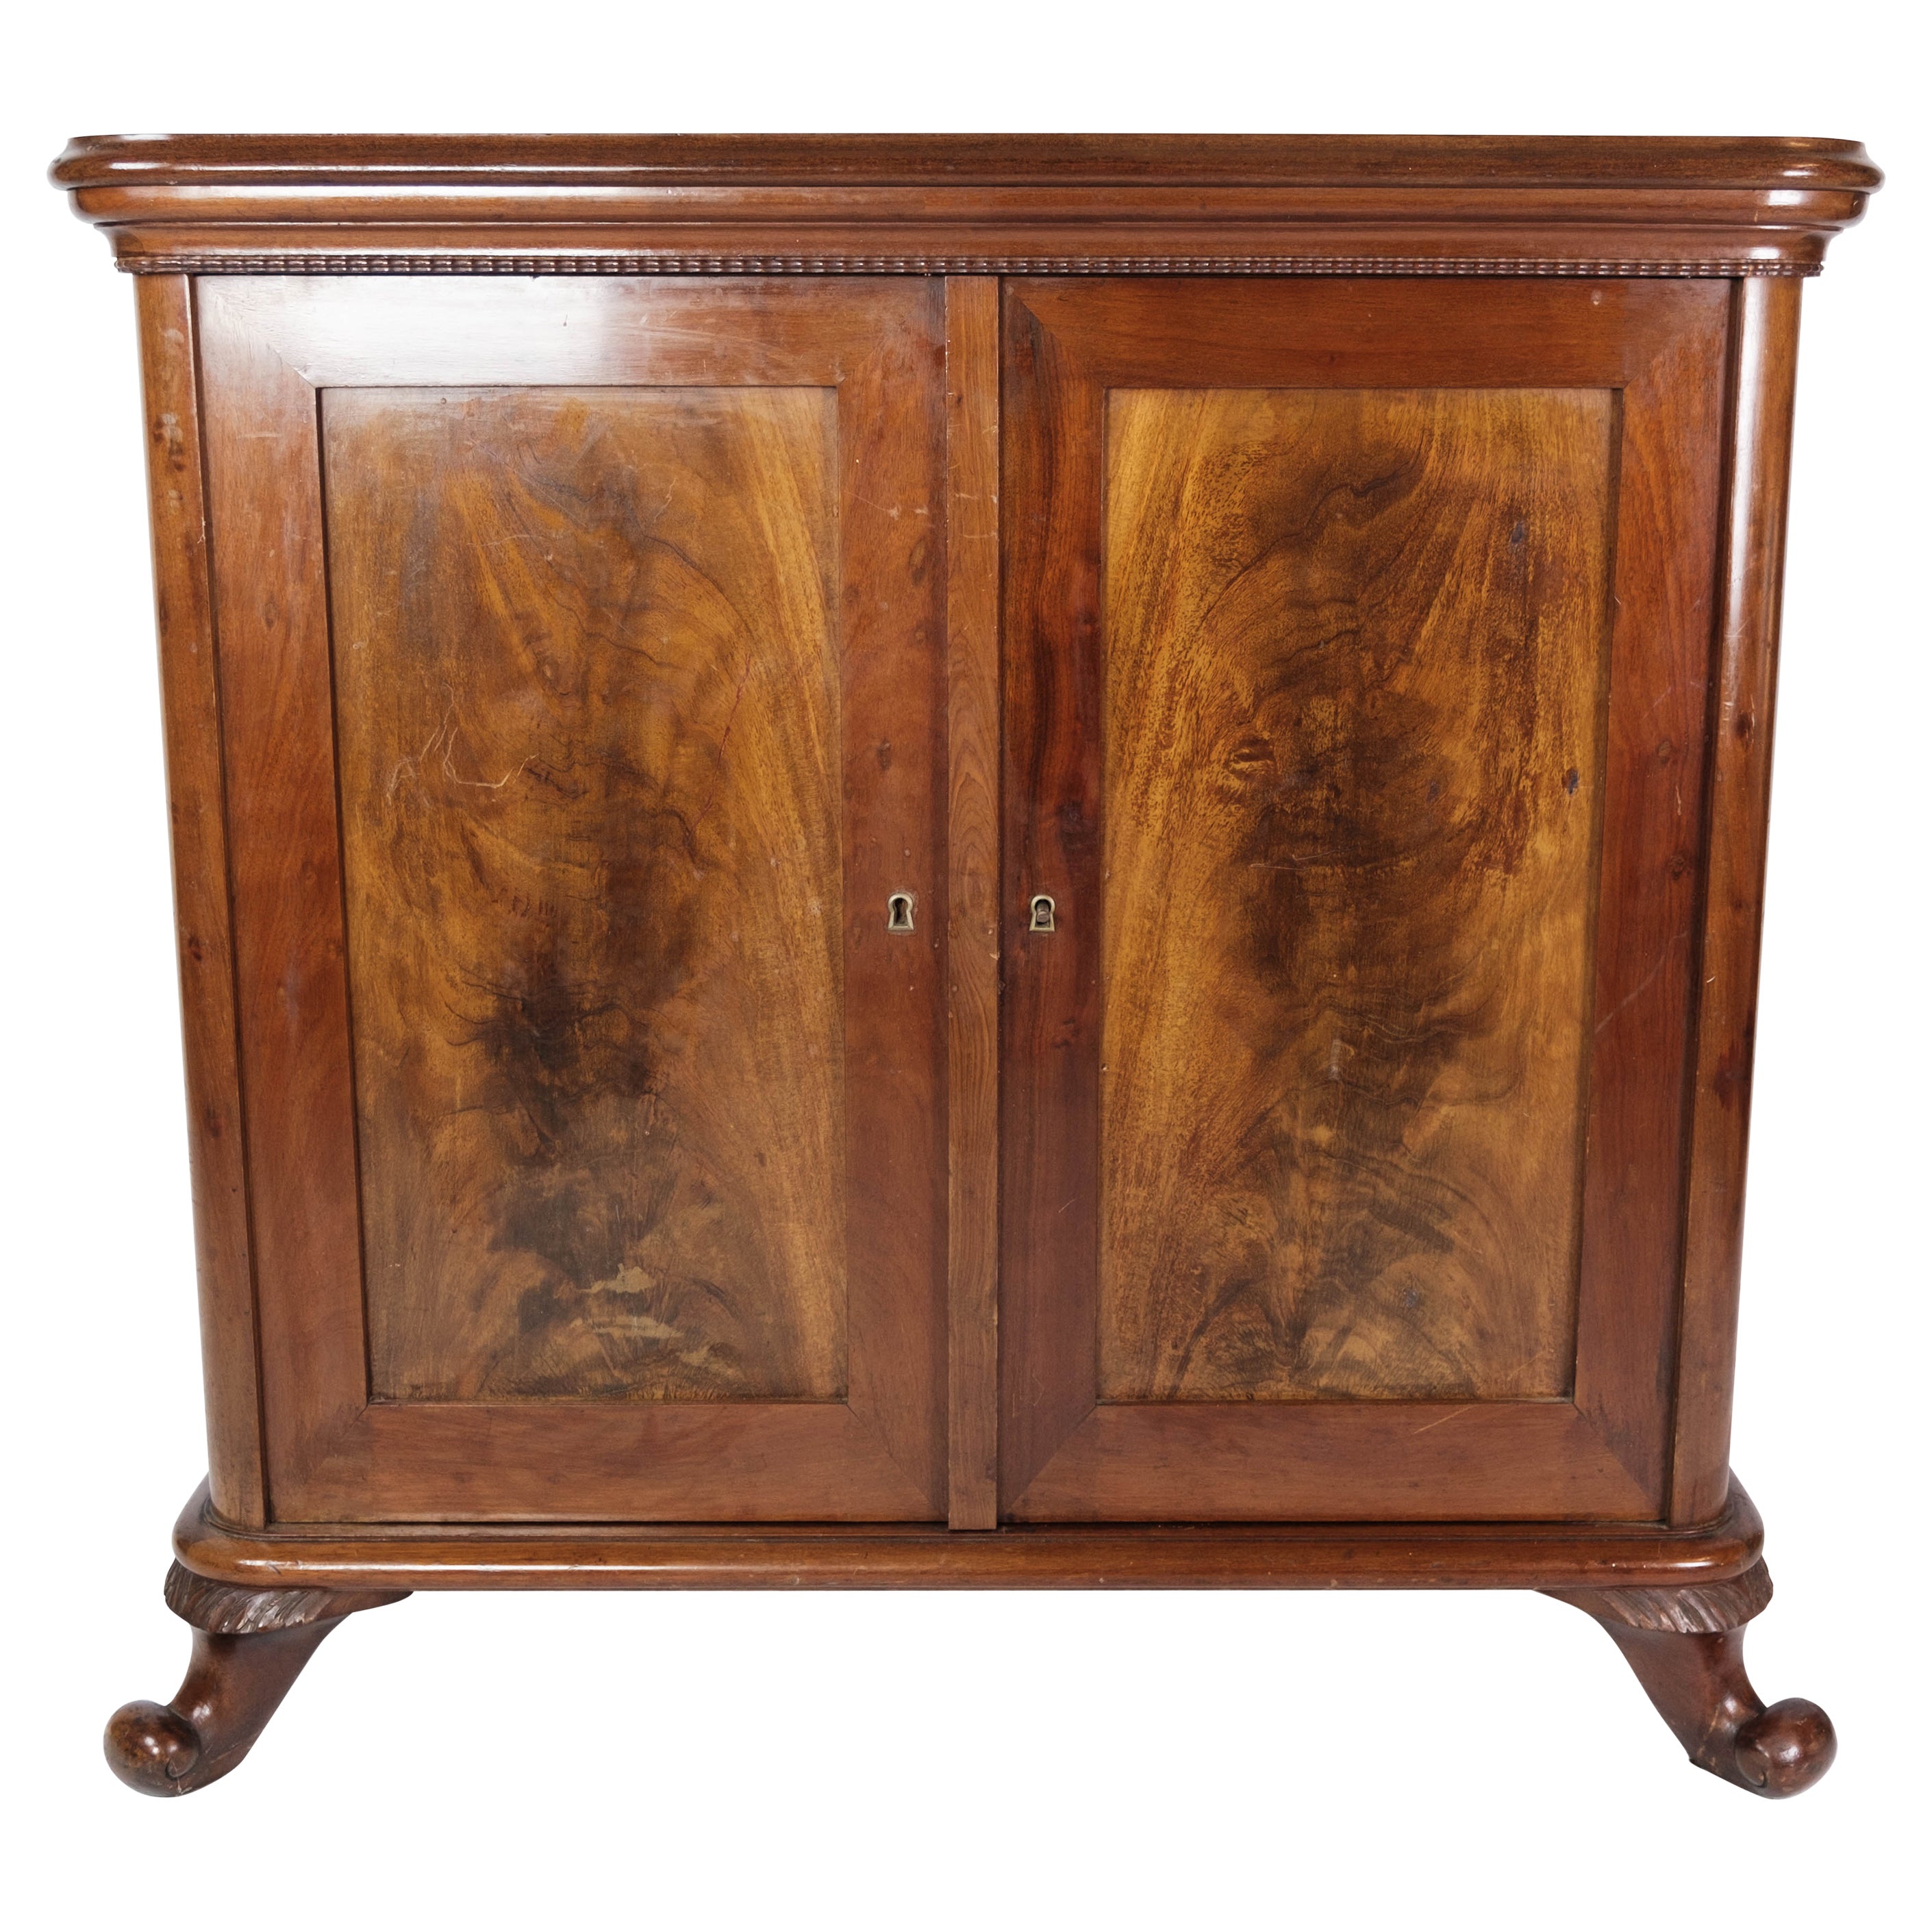 Cabinet of Mahogany on Feet, in Great Antique Condition from 1890